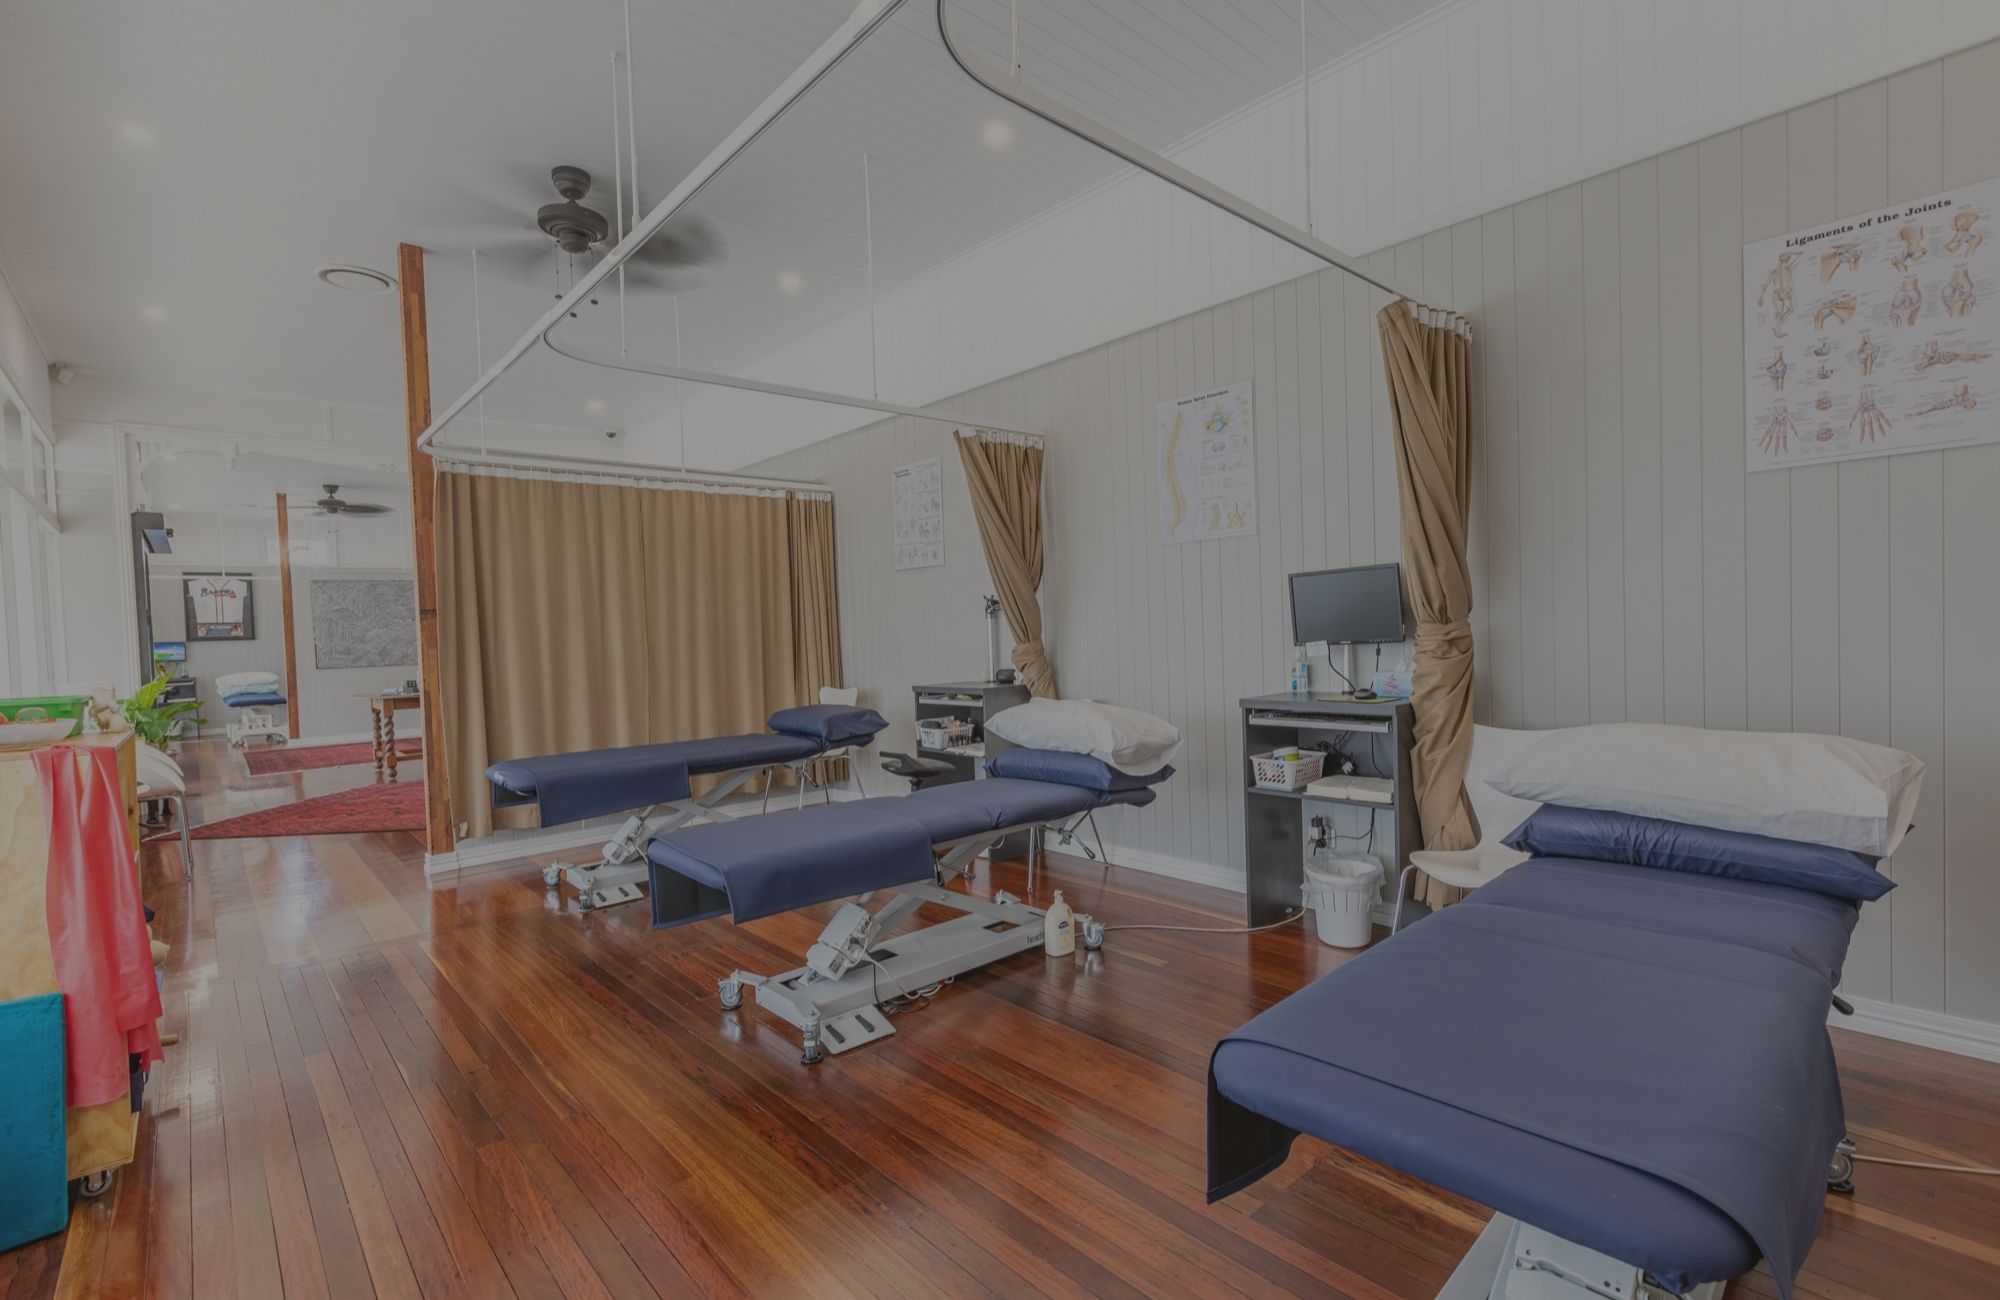 Three beds in a physio | Featured image for Pivotal Motion Physio.